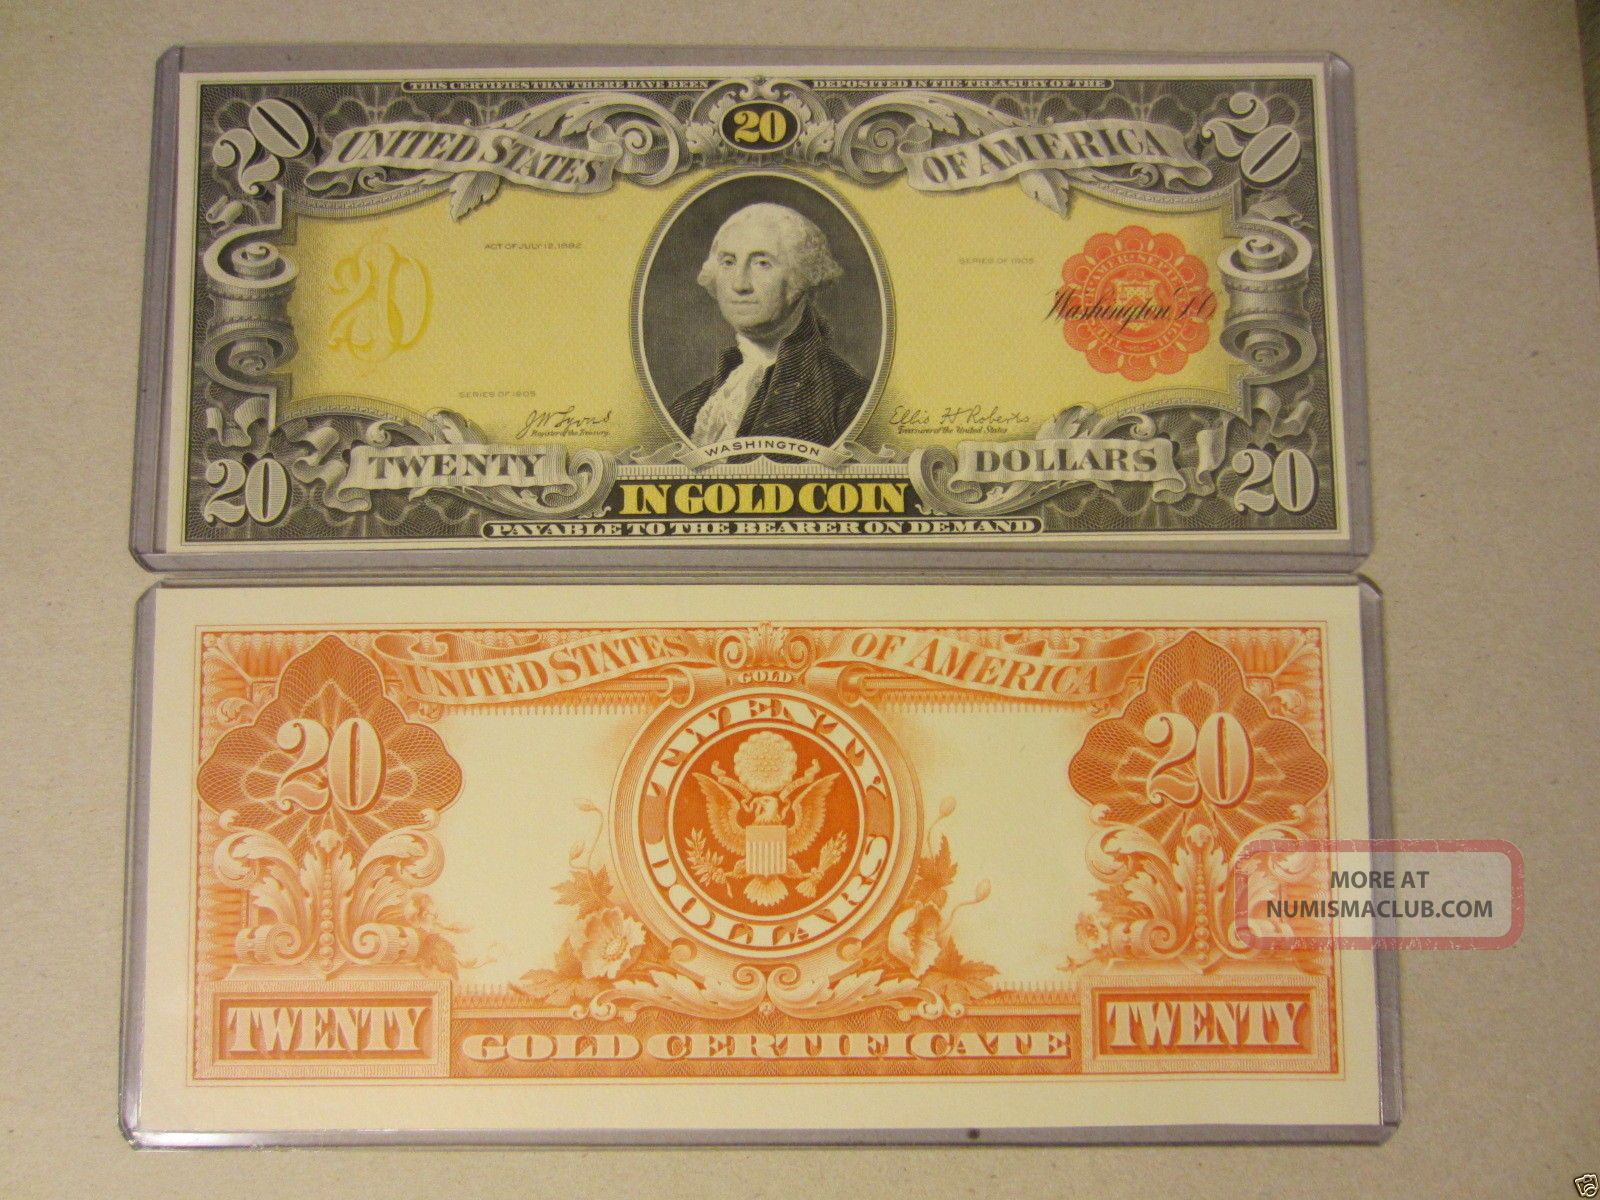 1905 $20 Dollars Gold Certificate Bep Intagio Proof Prints Technicolor Large Size Notes photo